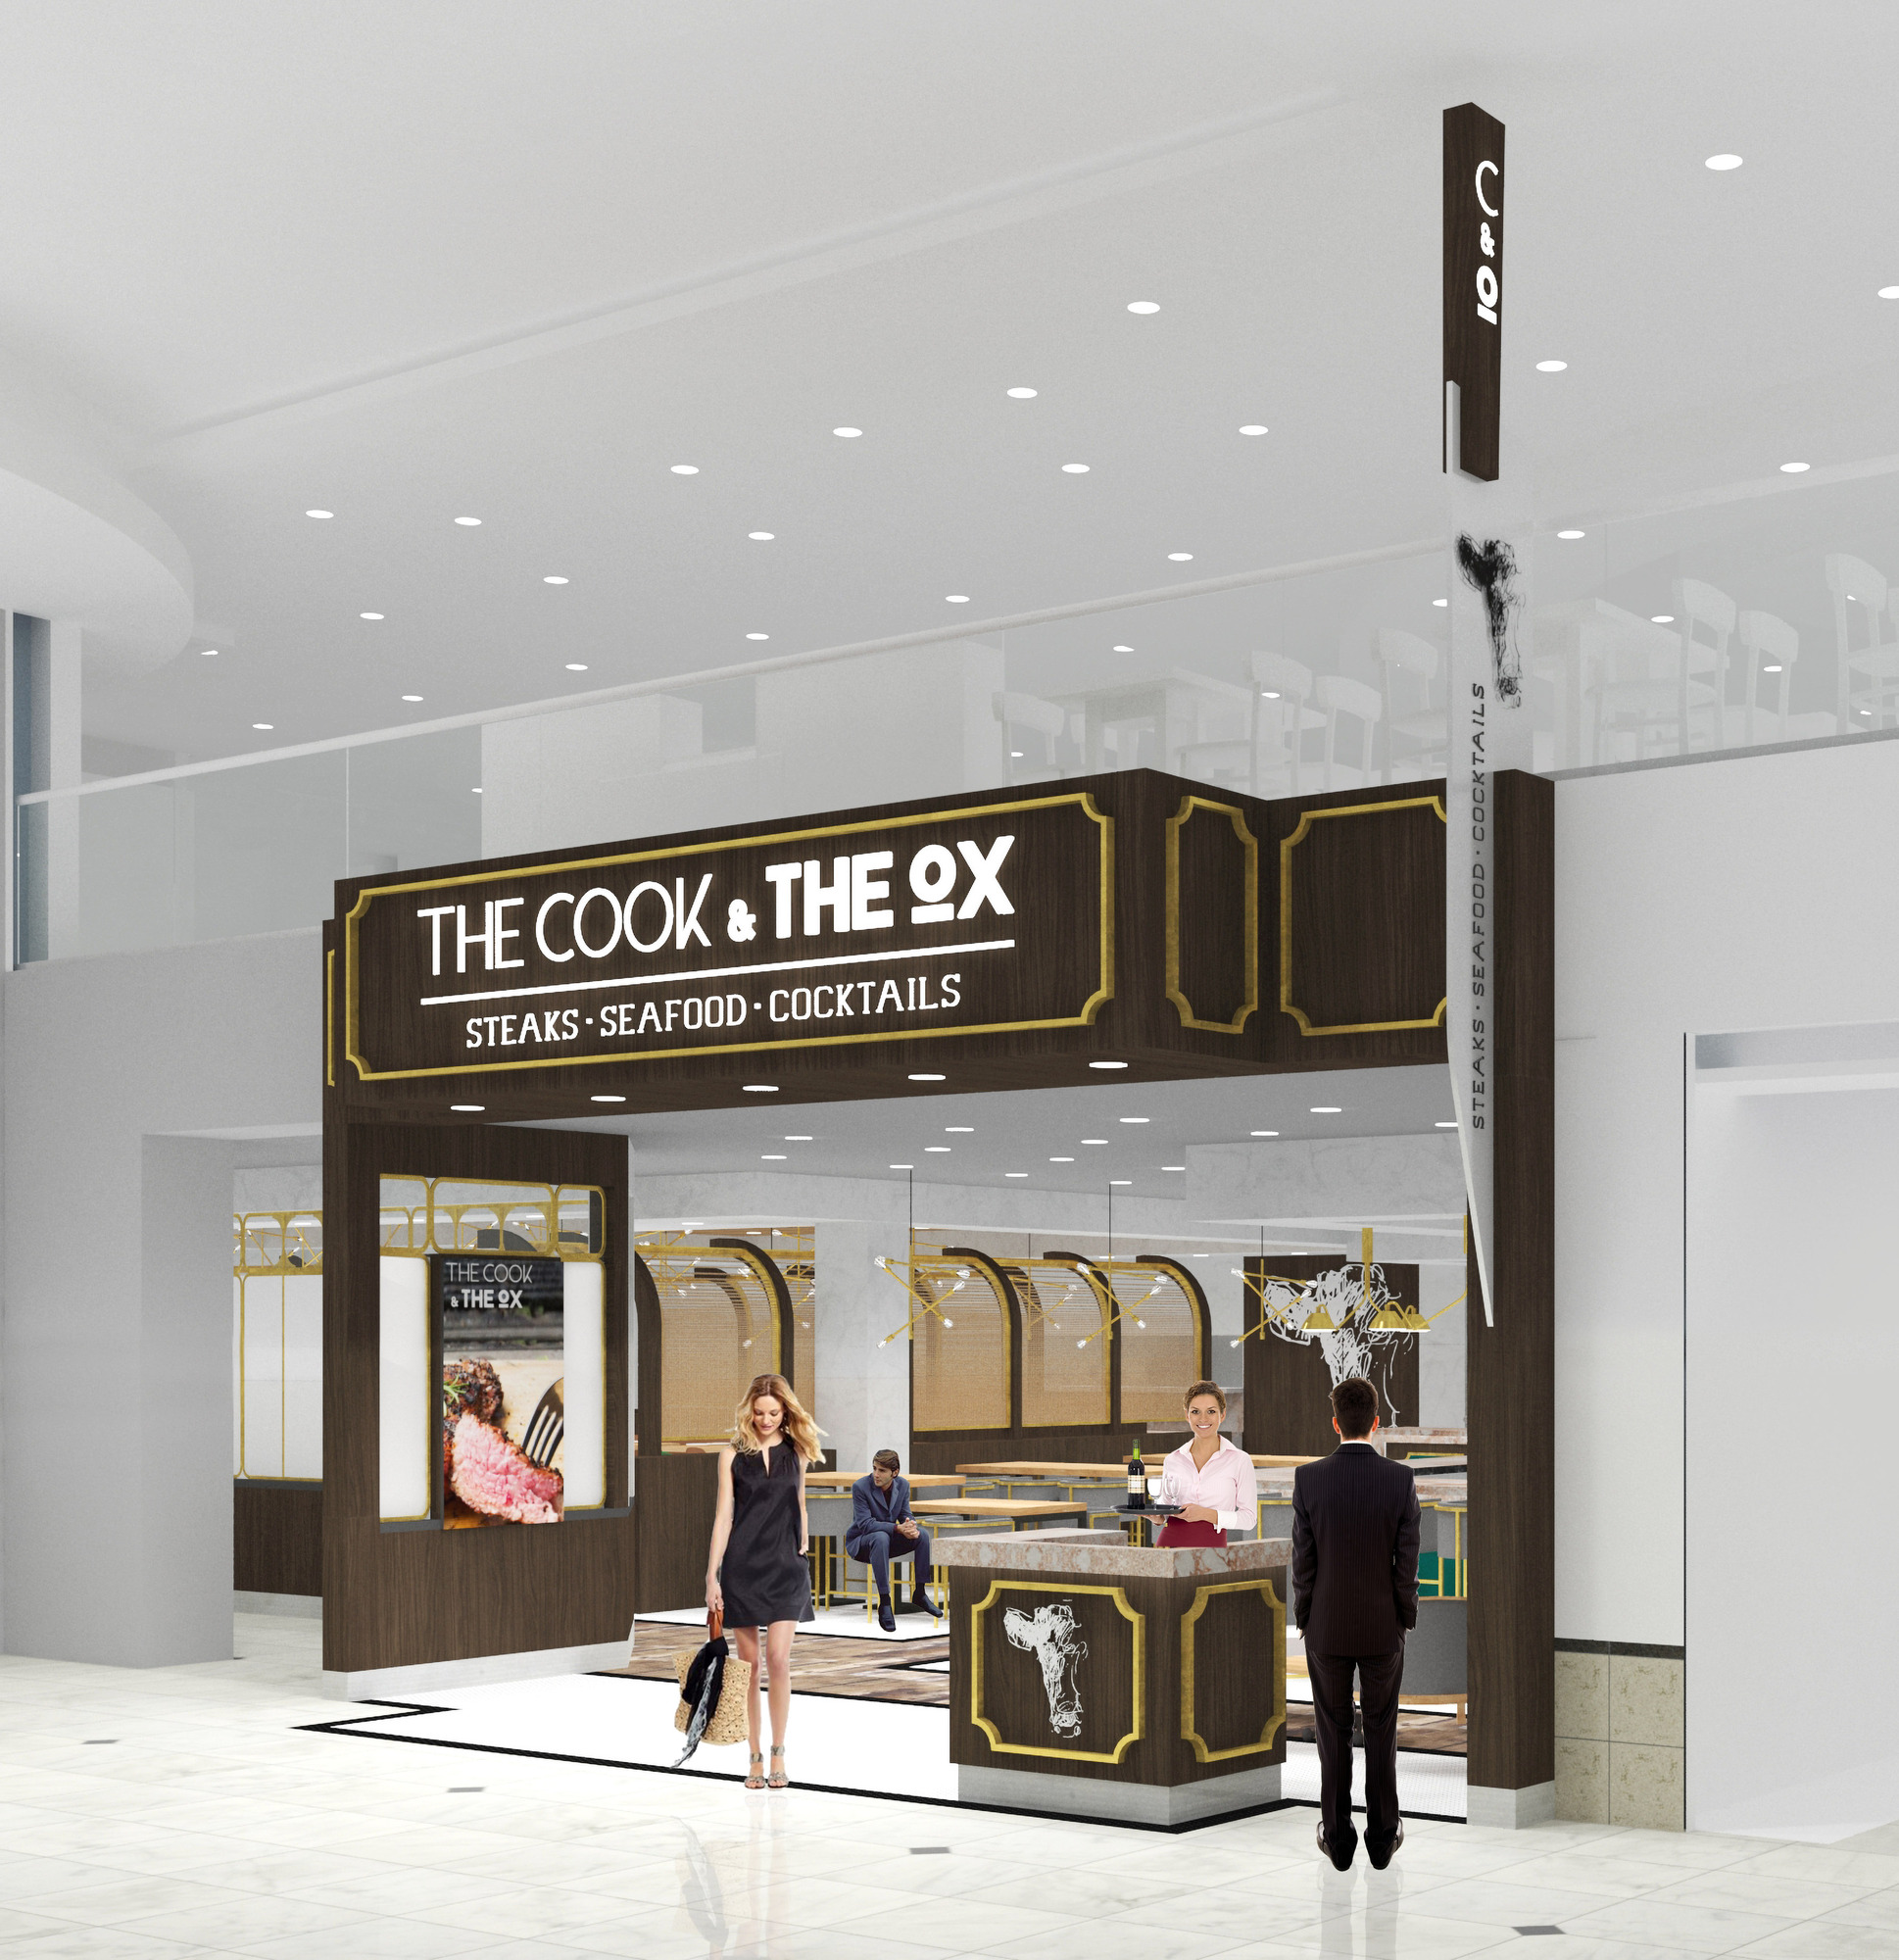 The Cook & The Ox will open at MSP Airport on August 1.